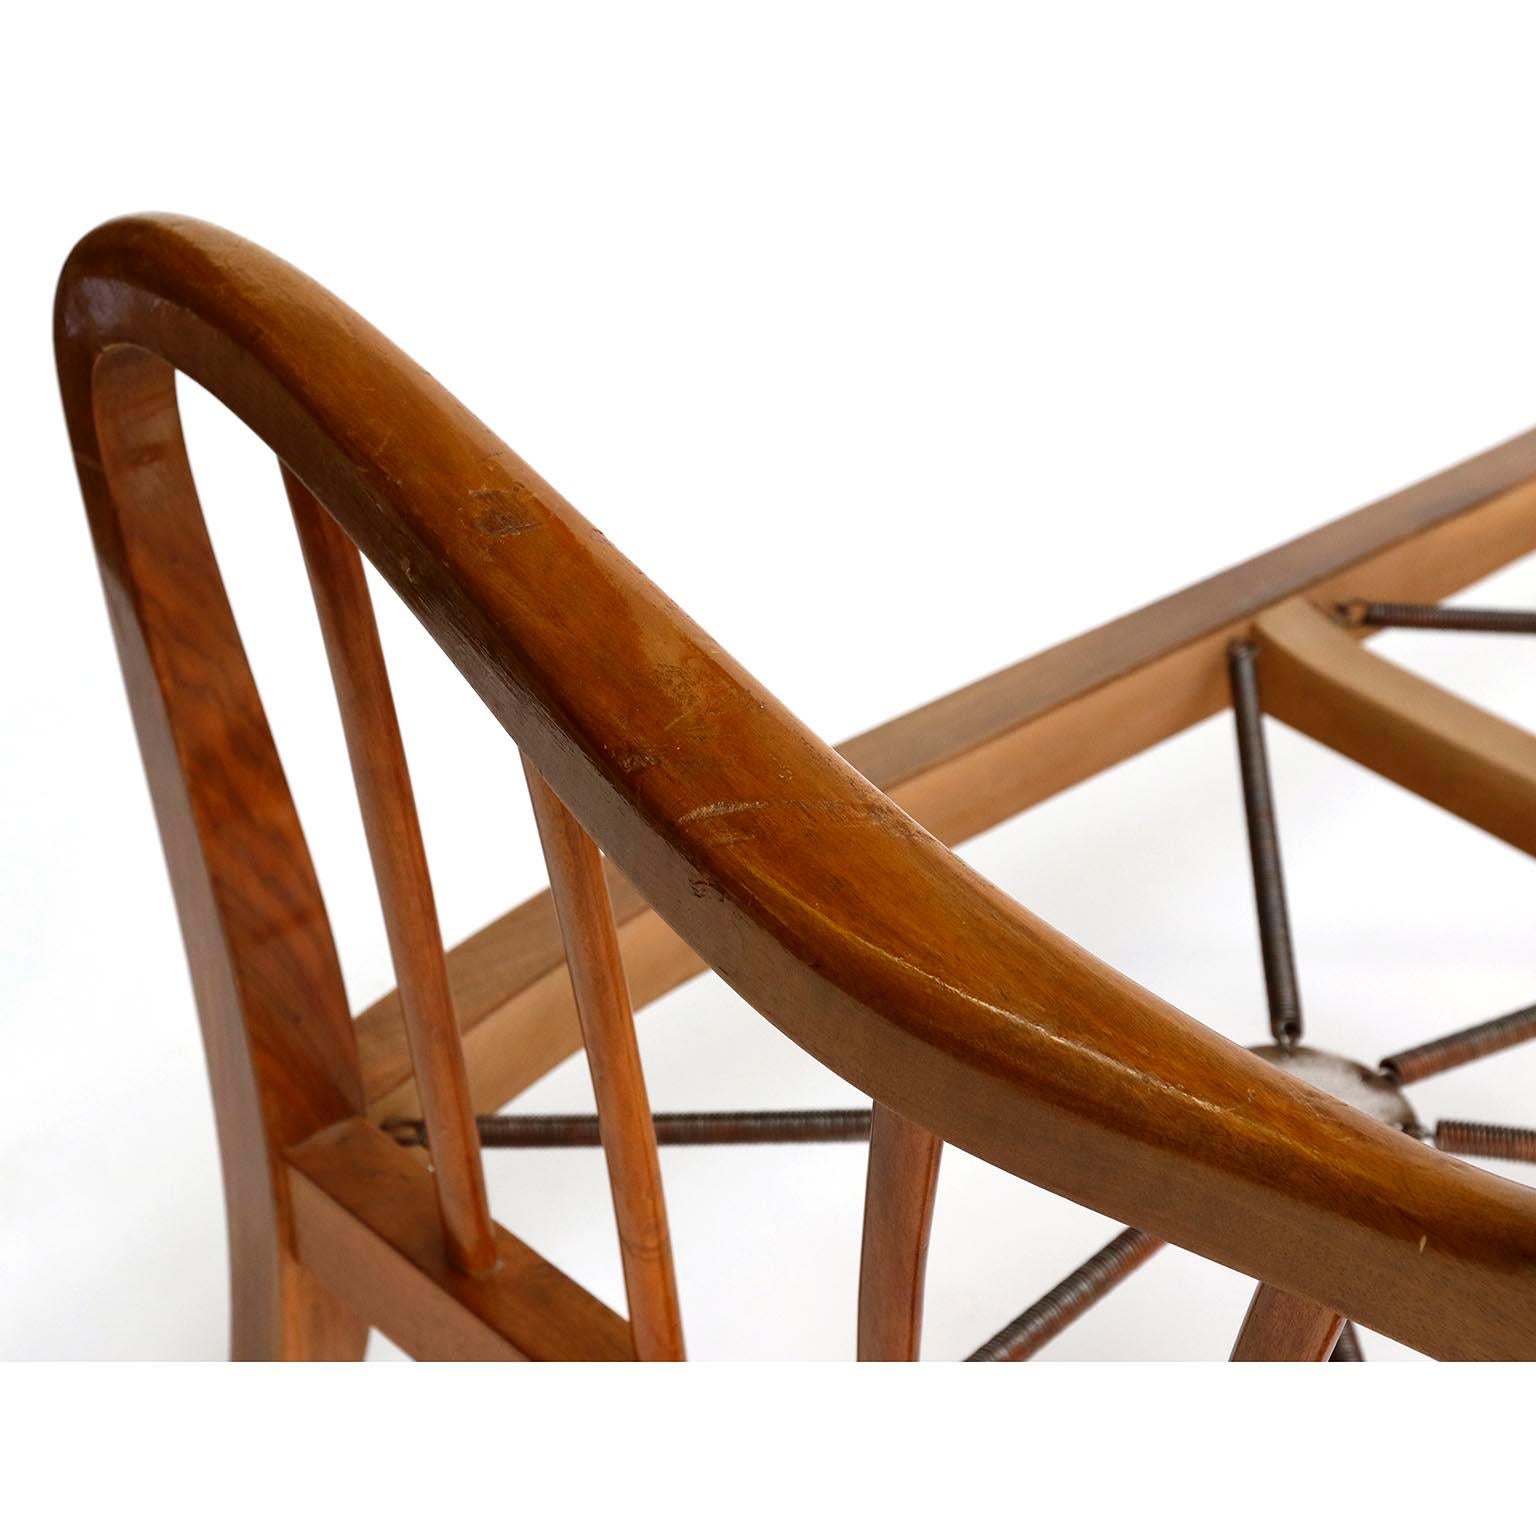 Seette Bench Seat Attributed to Josef Frank, Walnut Wood, Thonet, 1940 5